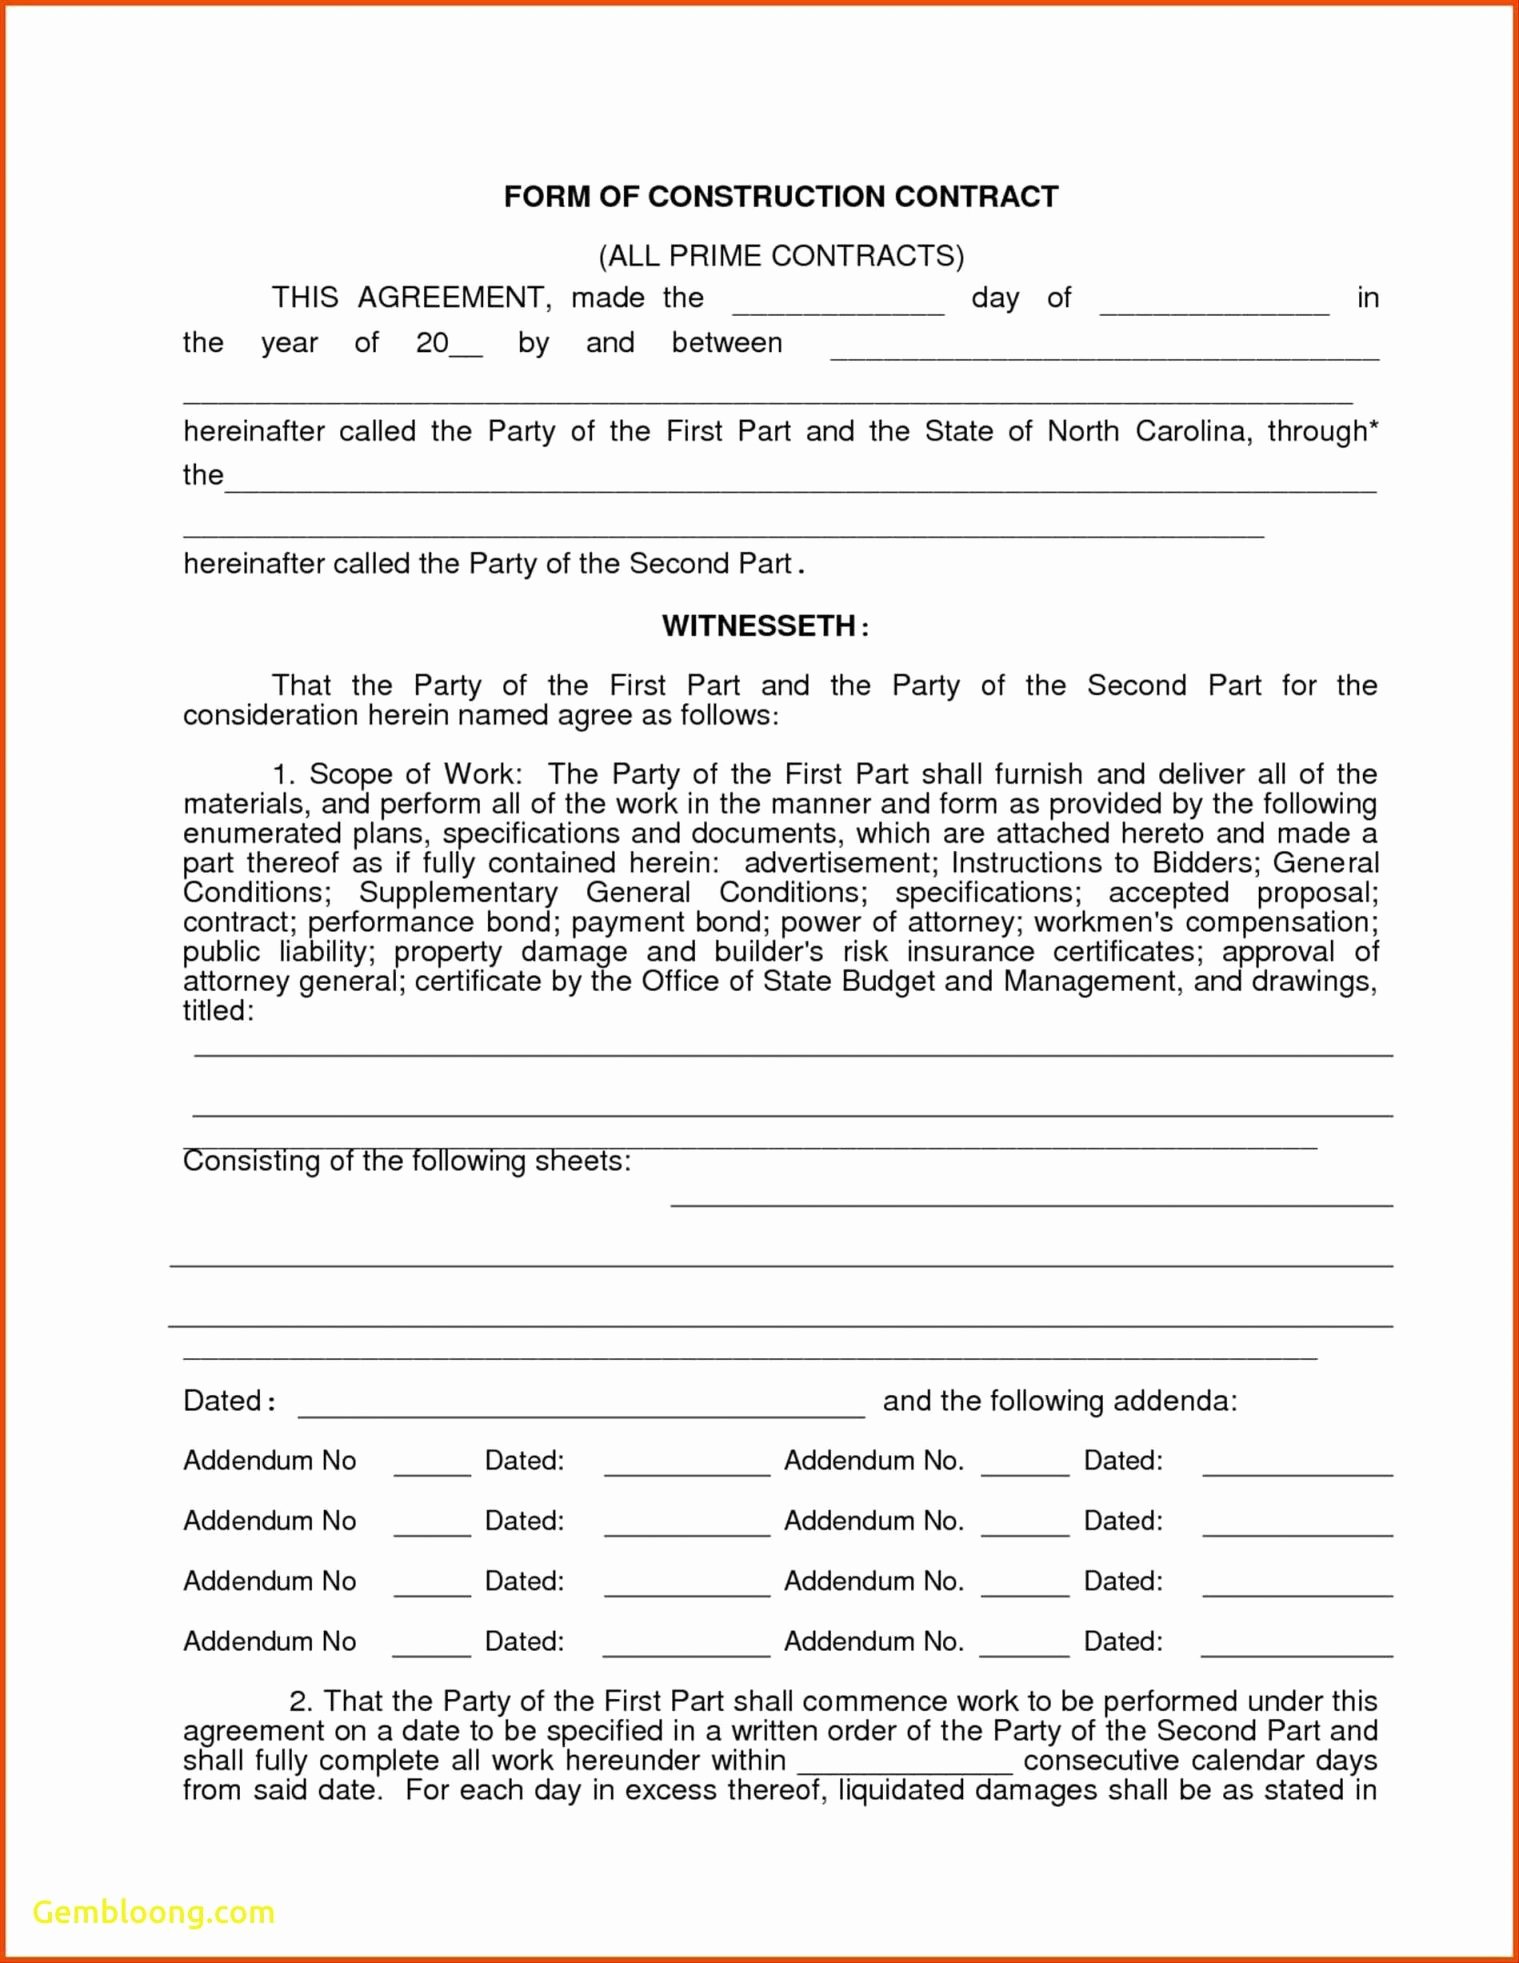 Simple Construction Contract Template Elegant Construction Contract forms